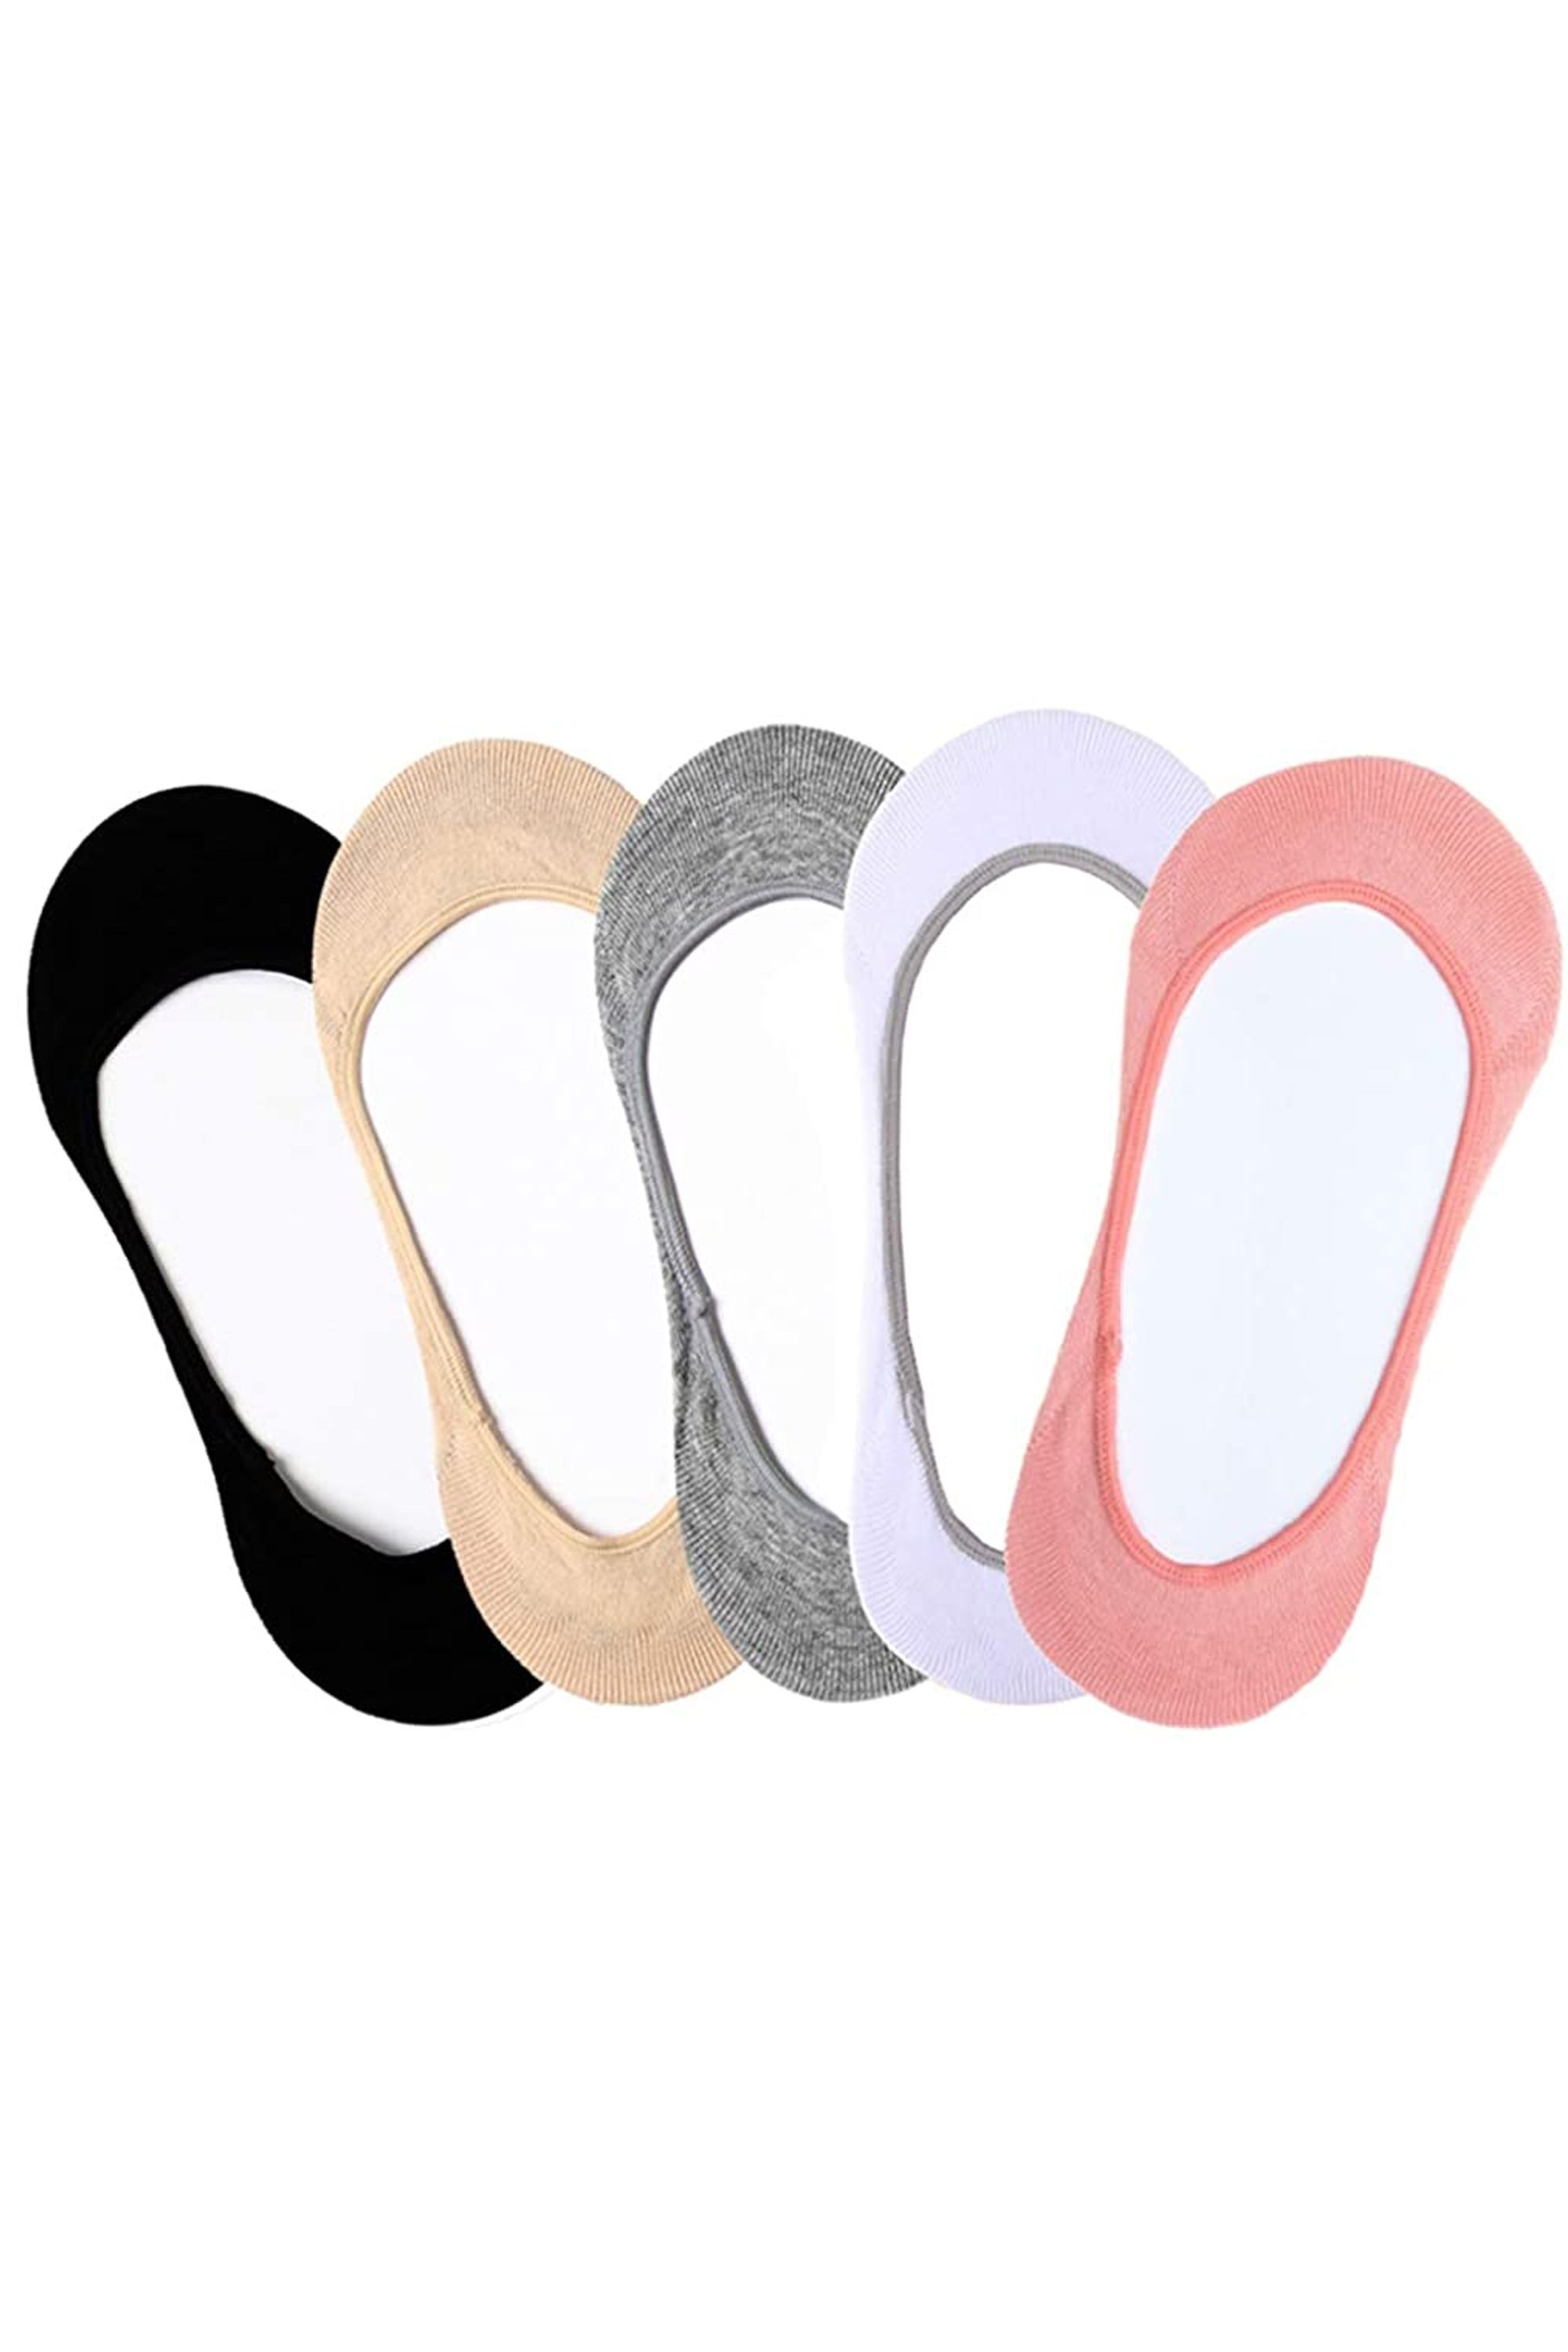 Womens No Show Thin Socks Cotton Nylon Low Cut Liner Non Slip hidden Invisible Socks for Flats Boat Sneaker 4 to 6 pack 